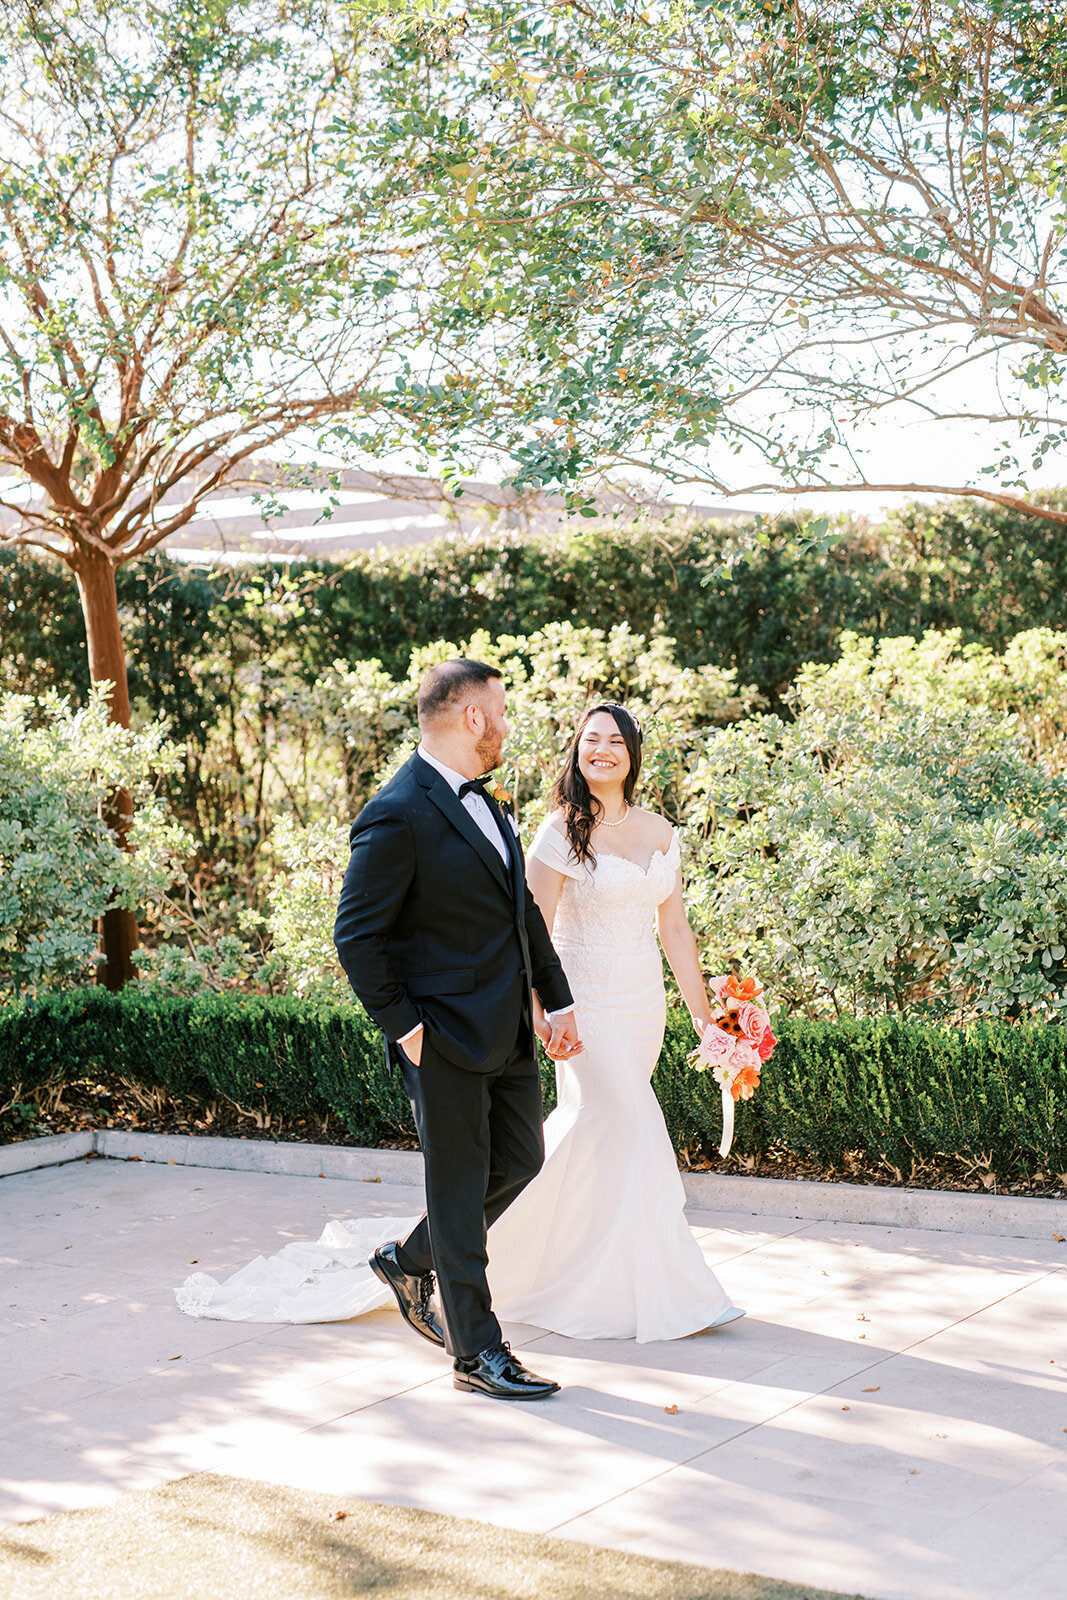 Aly Matei Photography - Gabrielle & Steven at McGovern-151